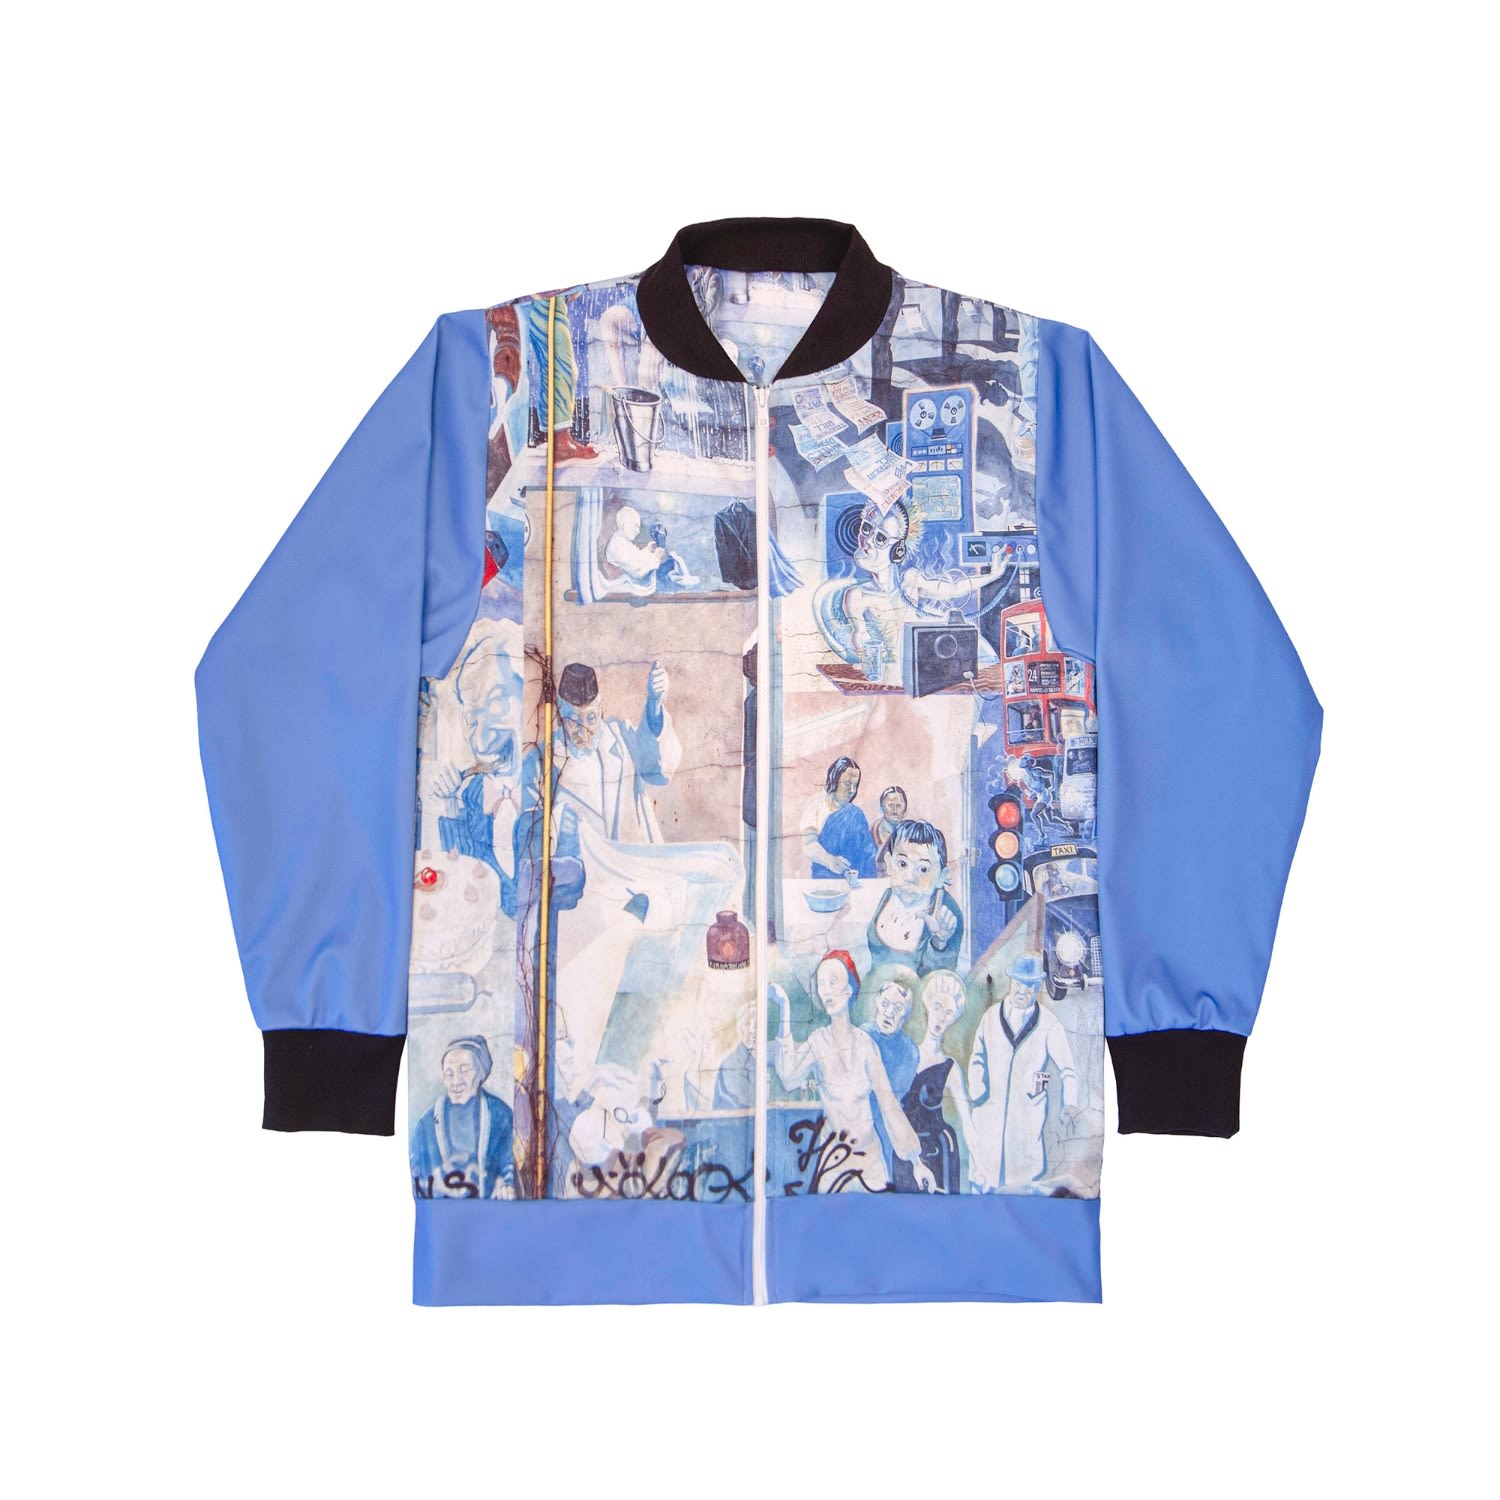 Men’s Bomber Jacket In Blue With Graffiti Design Extra Large Mysimplicated